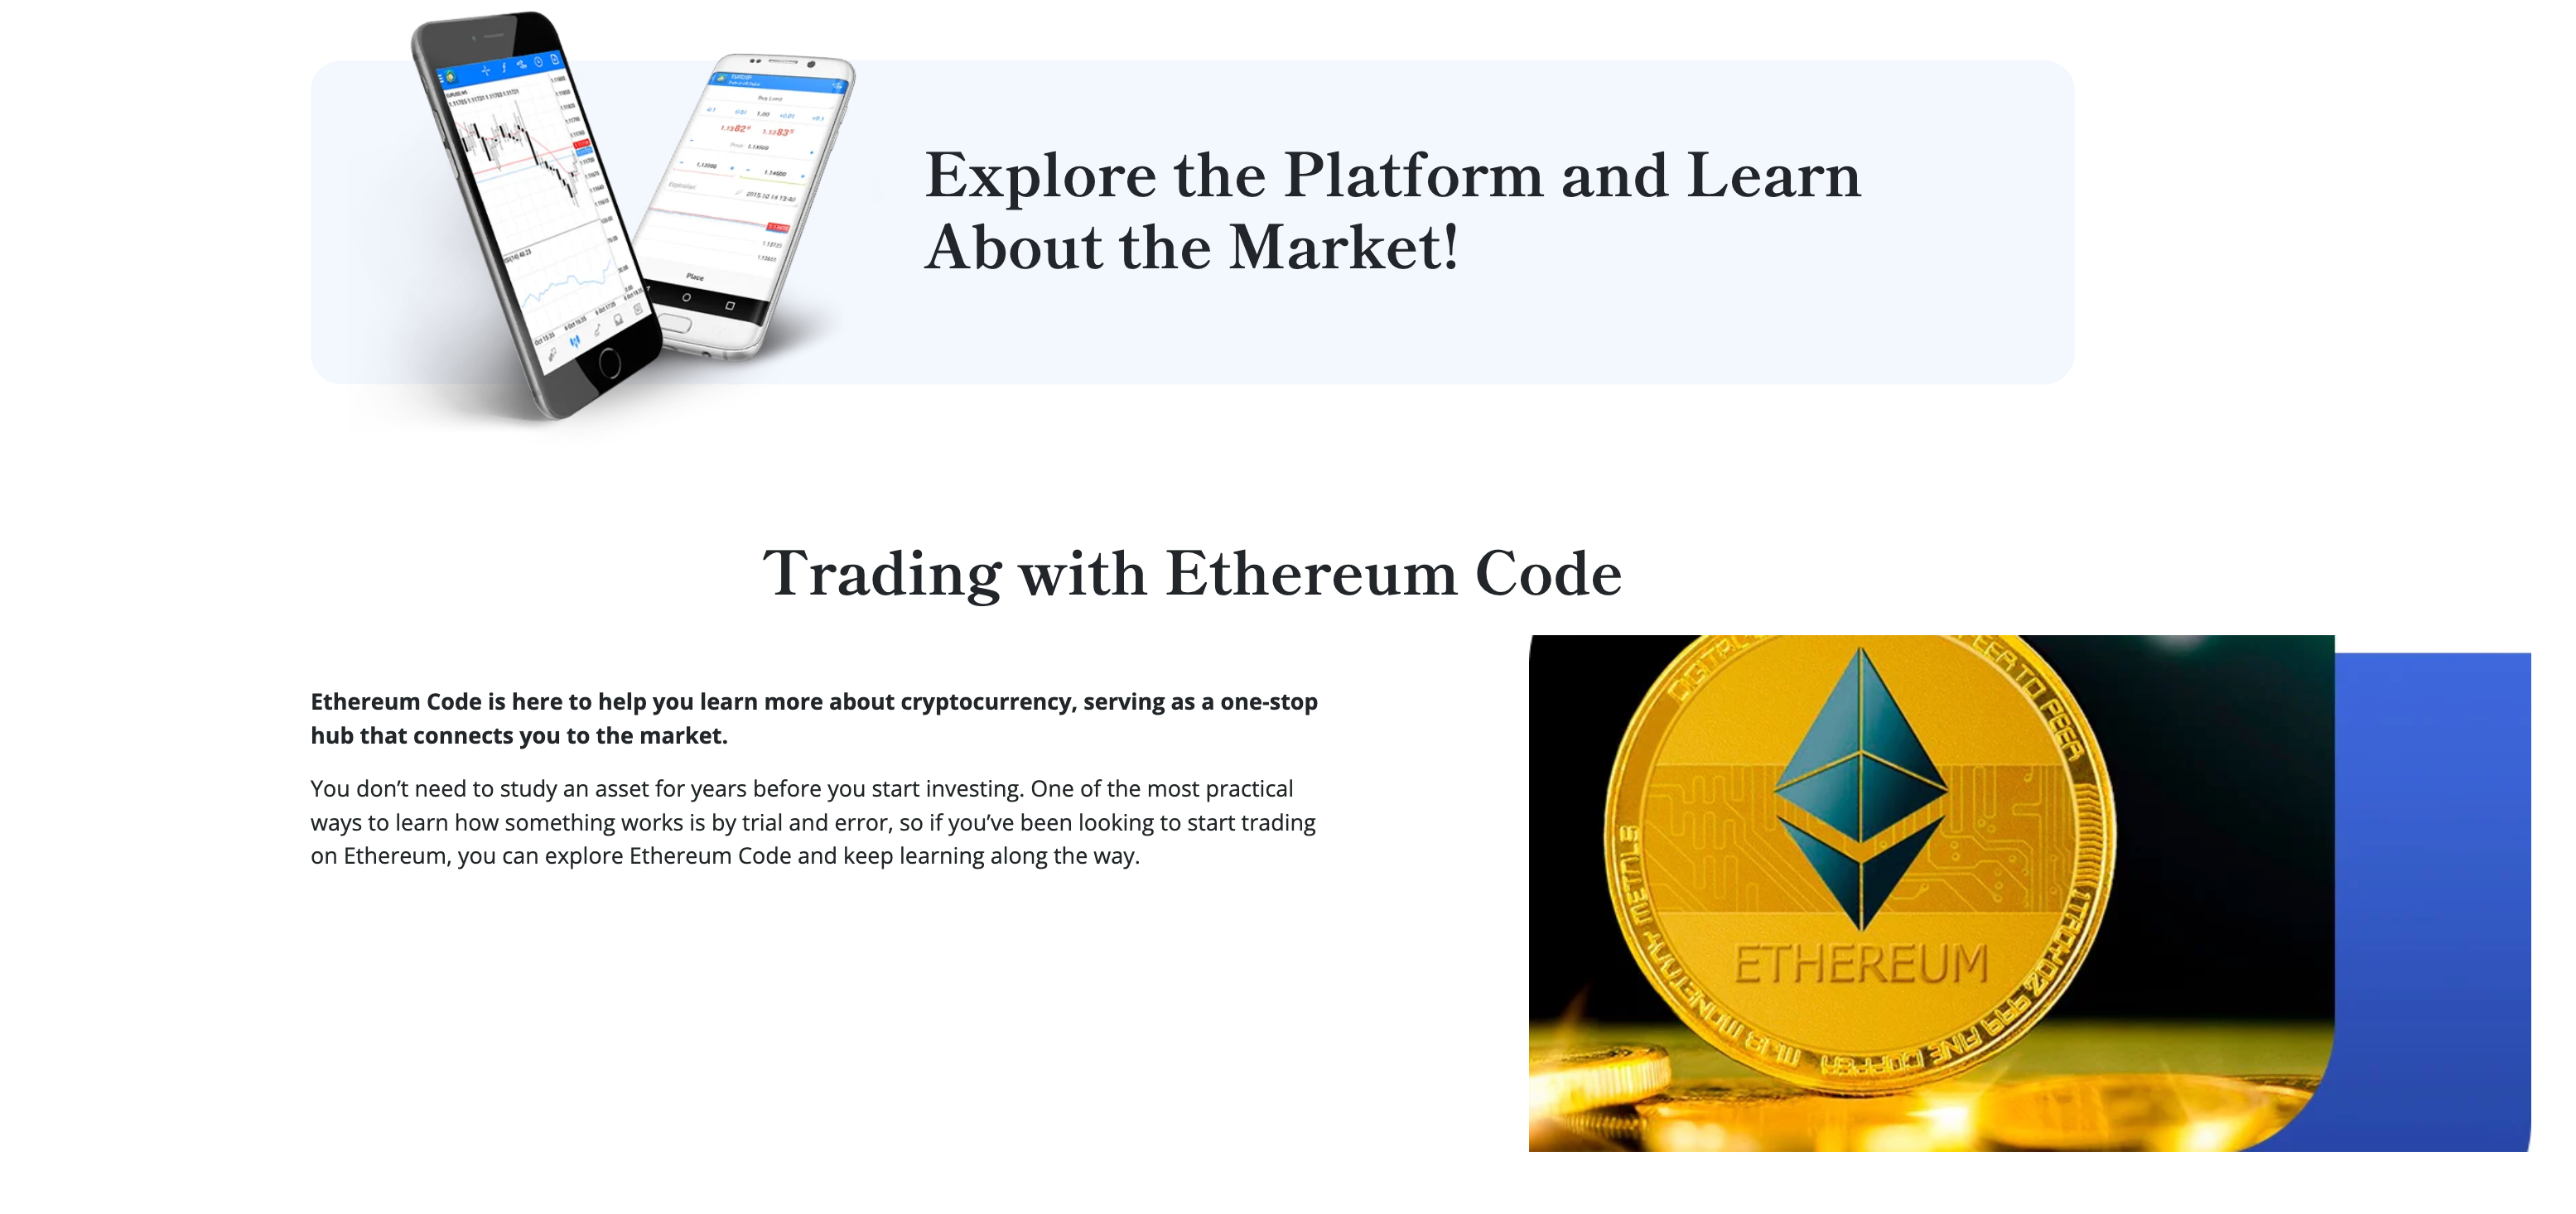 Trading with Ethereum Code